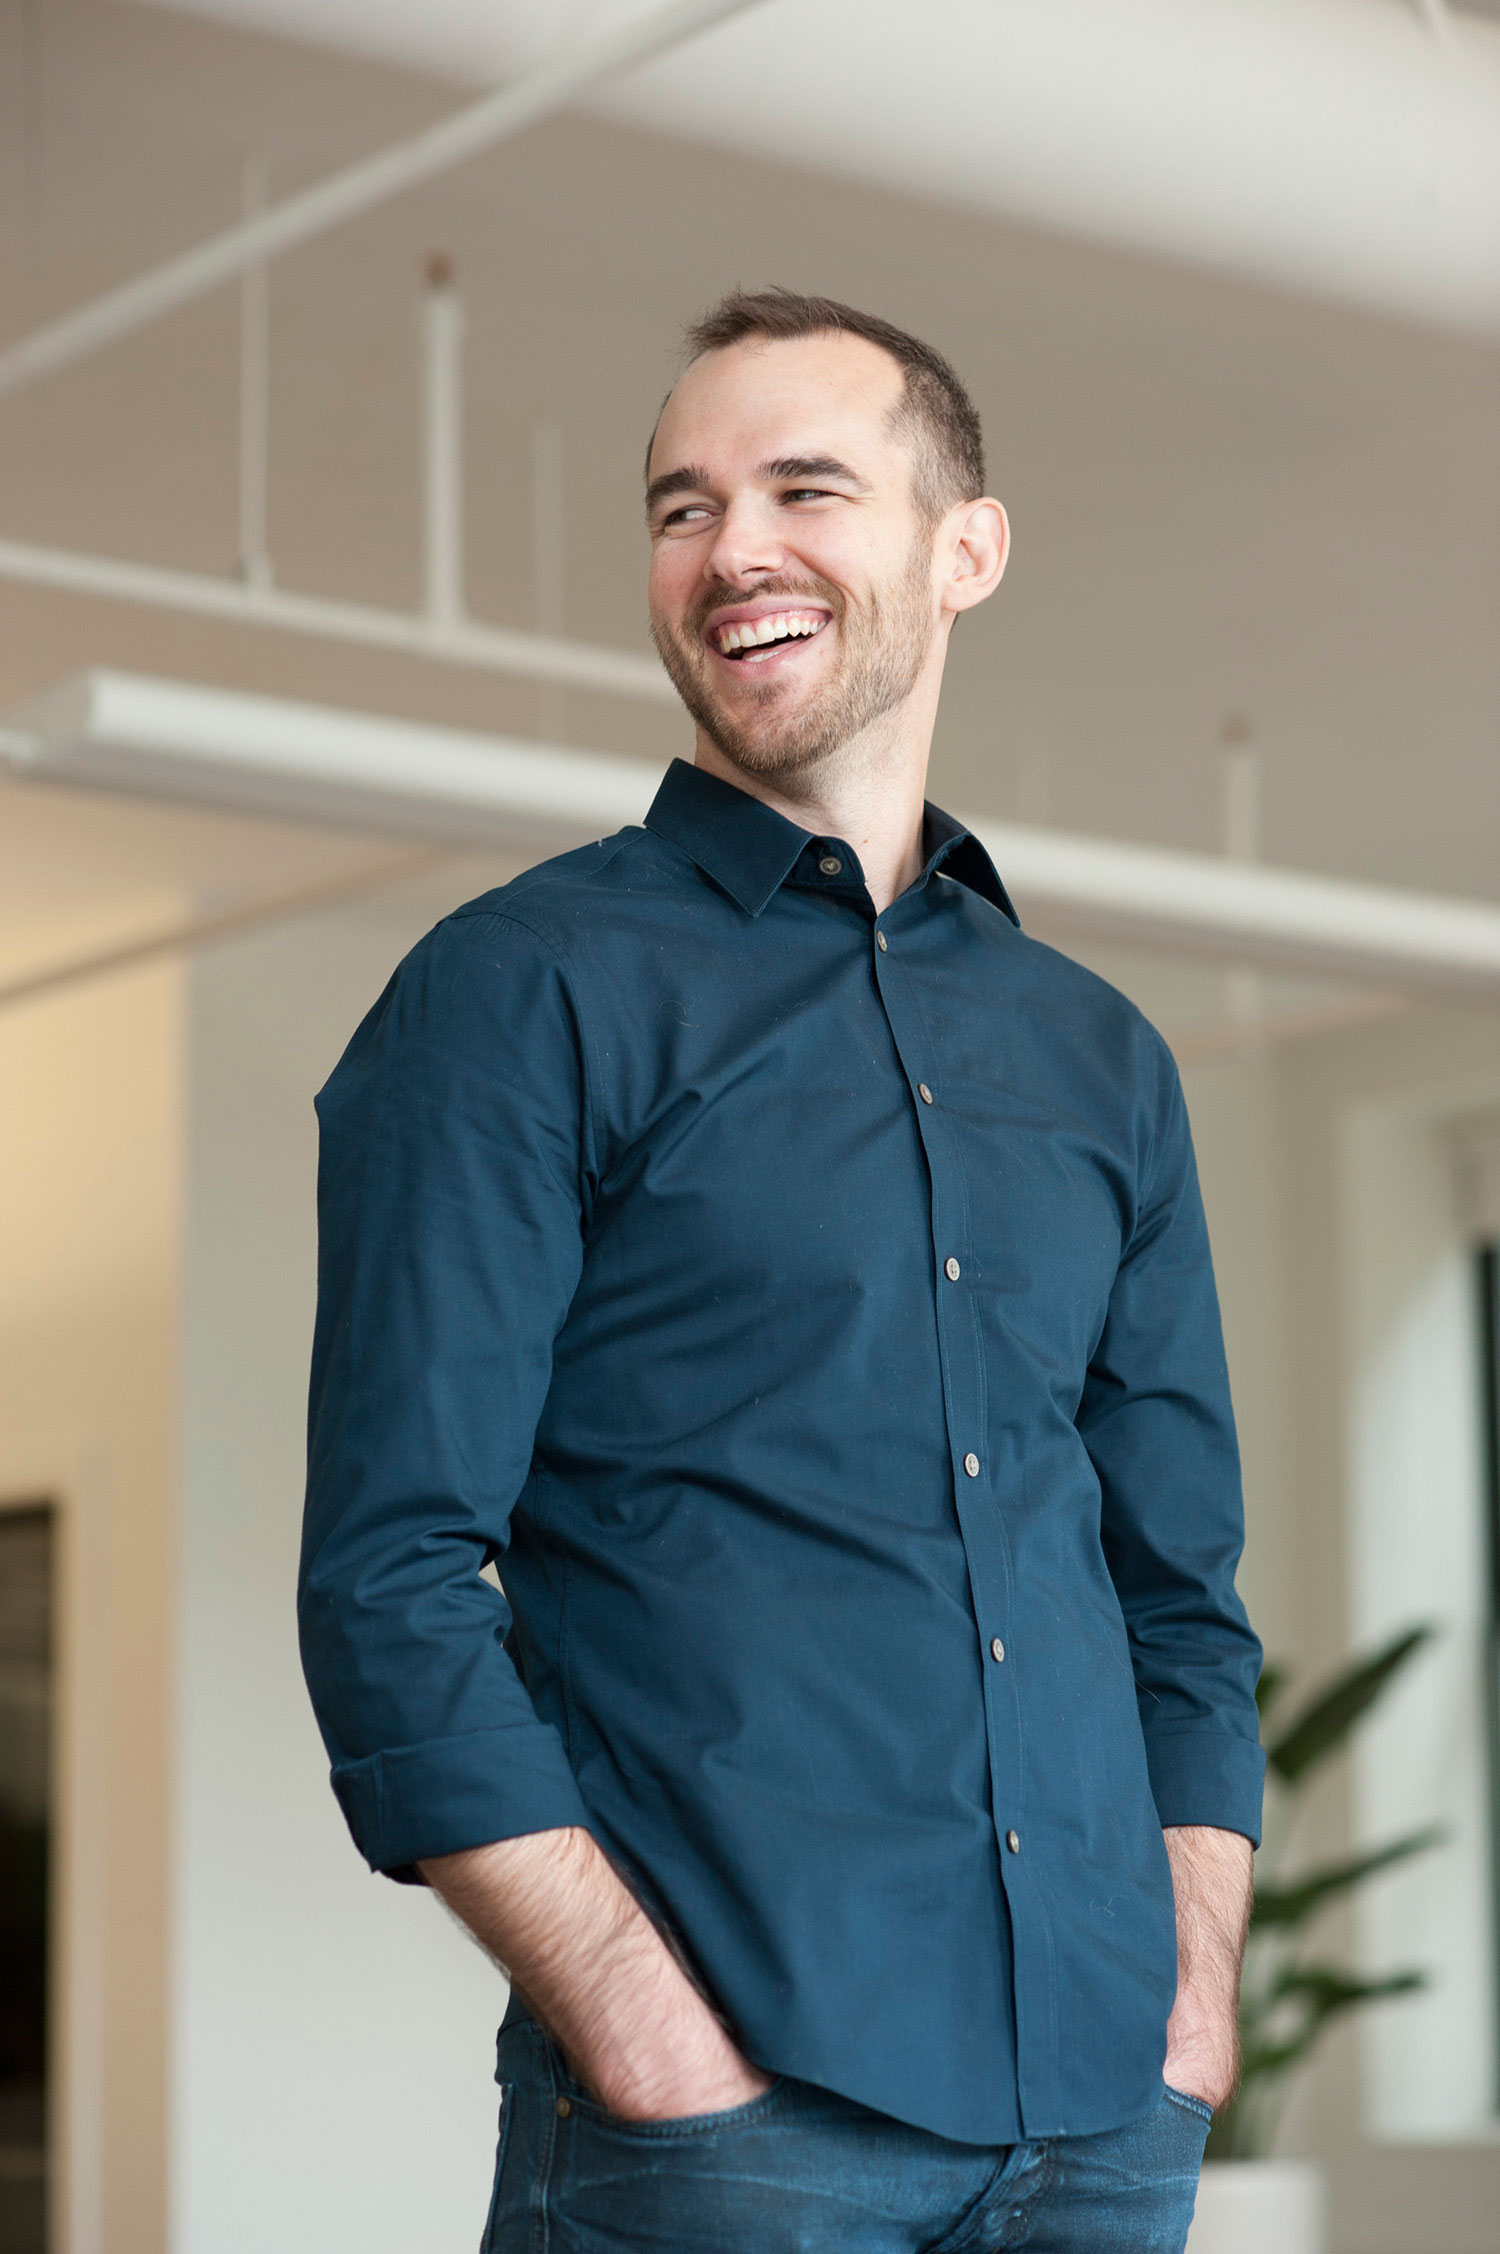 Jared McDaniel, Help Scout Co-Founder